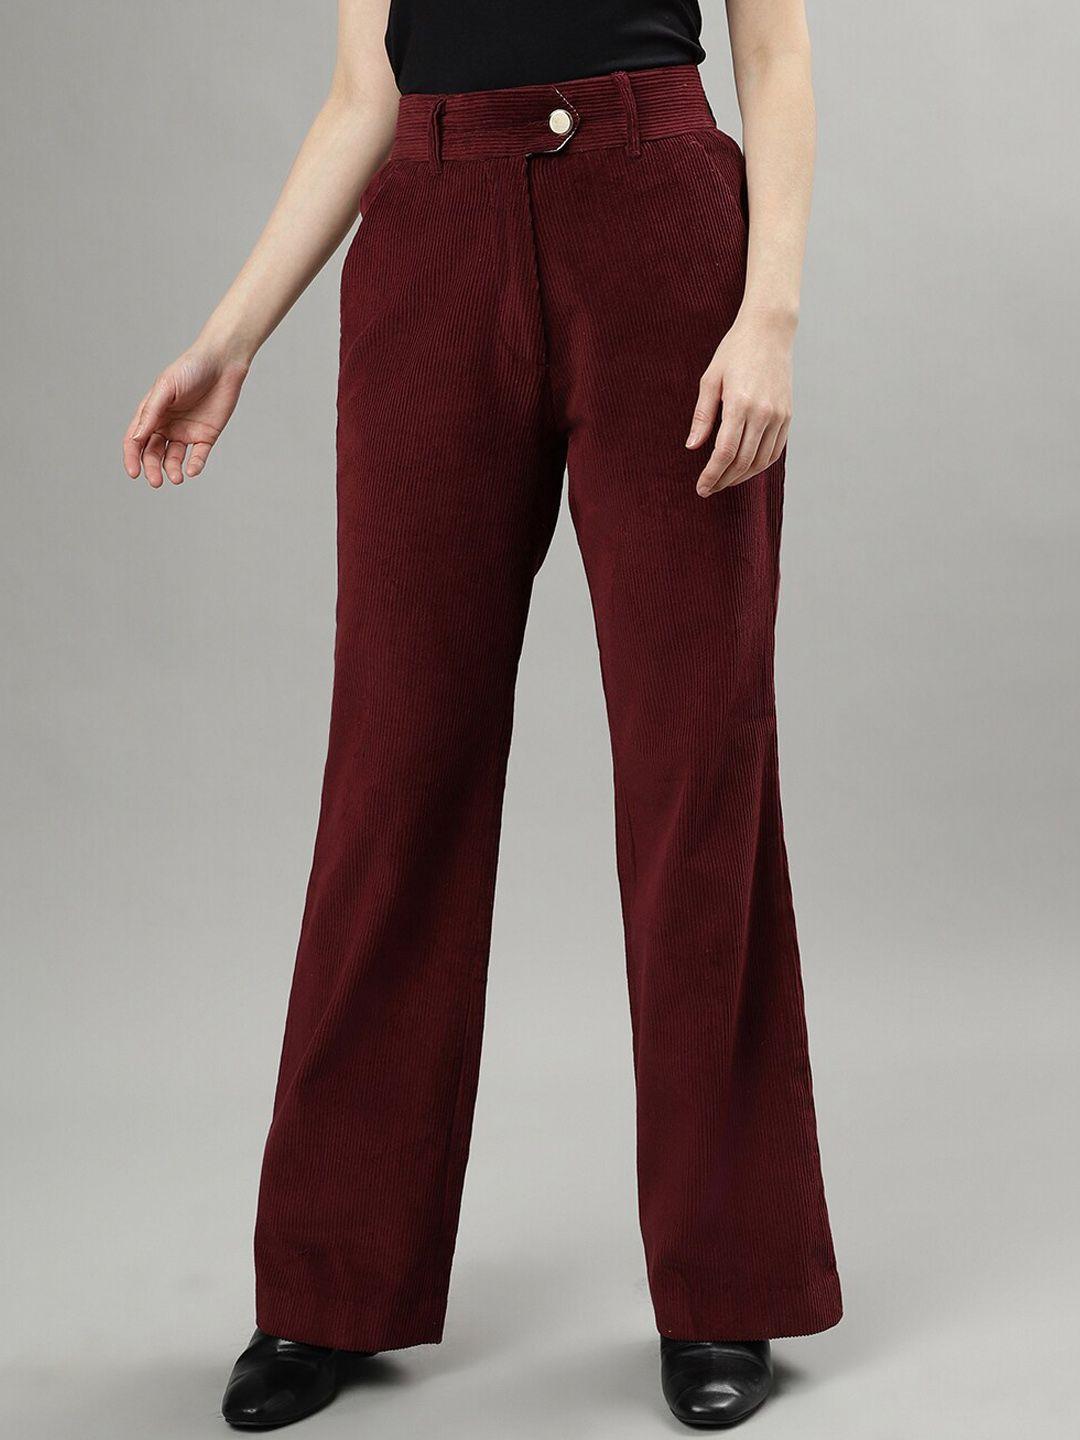 iconic women textured high-rise pure cotton parallel trousers